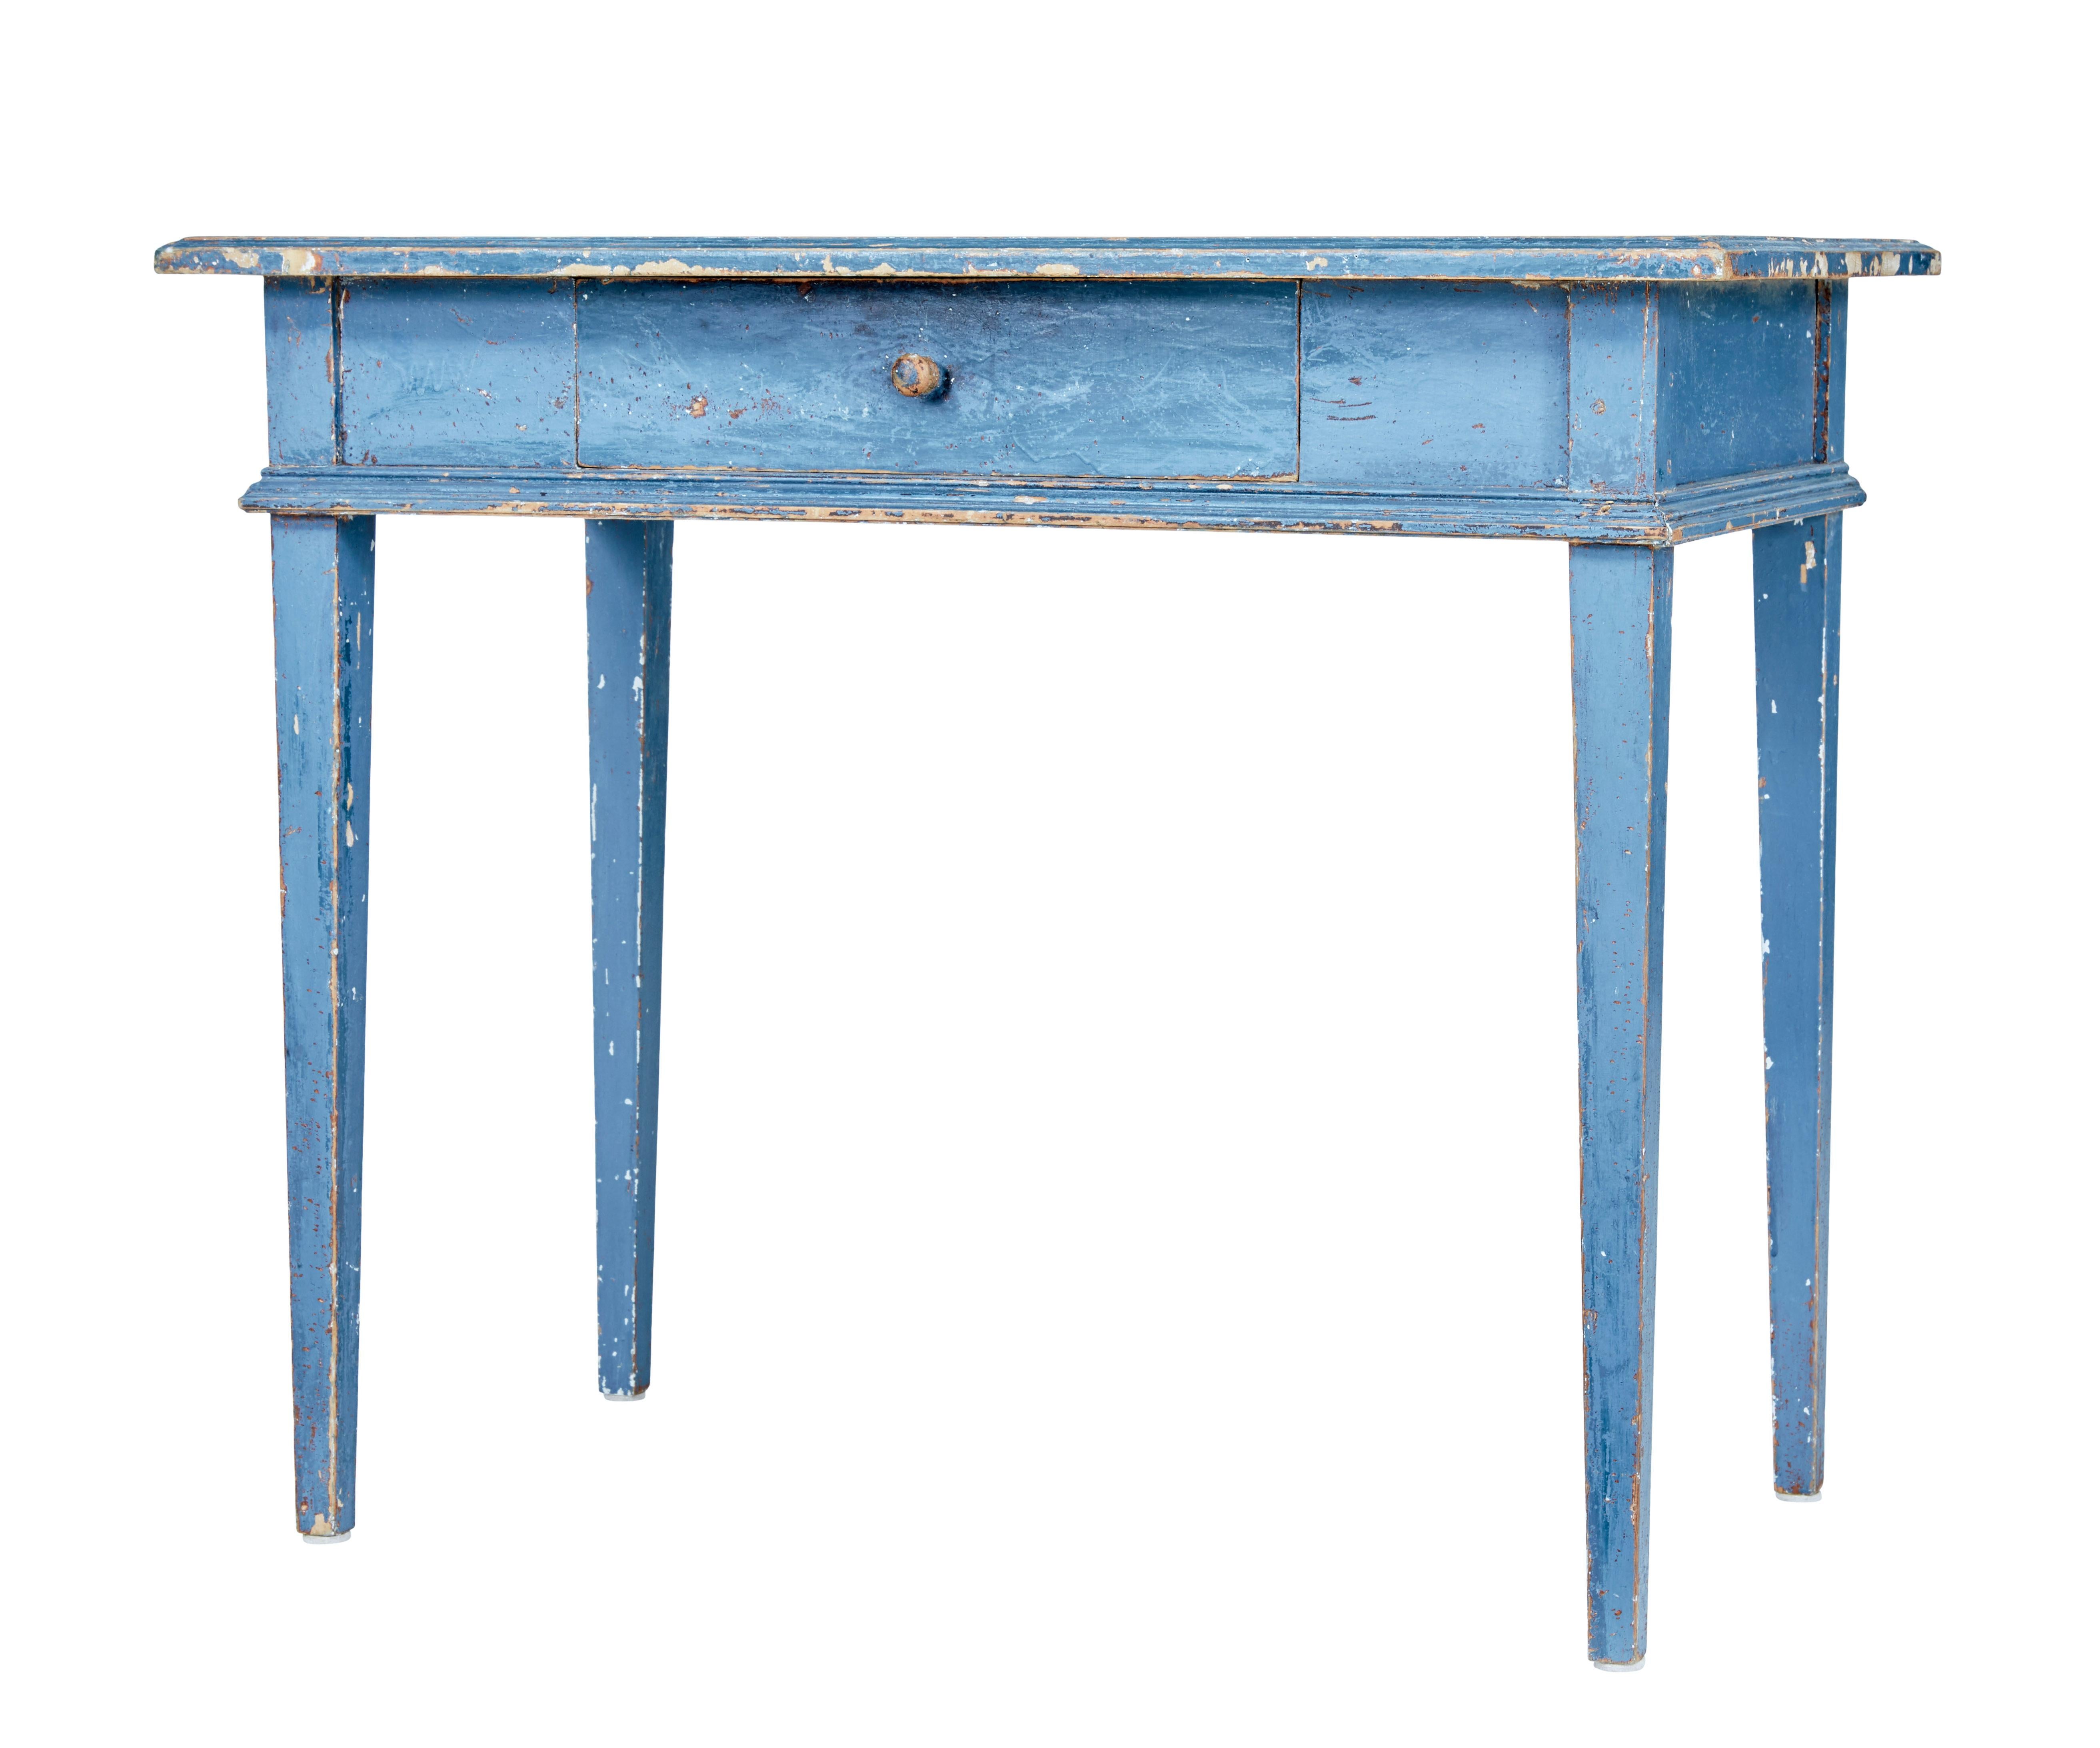 19th century hand painted Swedish side table circa 1880.

Lovely traditional Swedish side table in original striking blue paintwork. 

Rectangular slightly over-sailing top with bull nosed ends. Single drawer underneath. Standing on 4 tapering